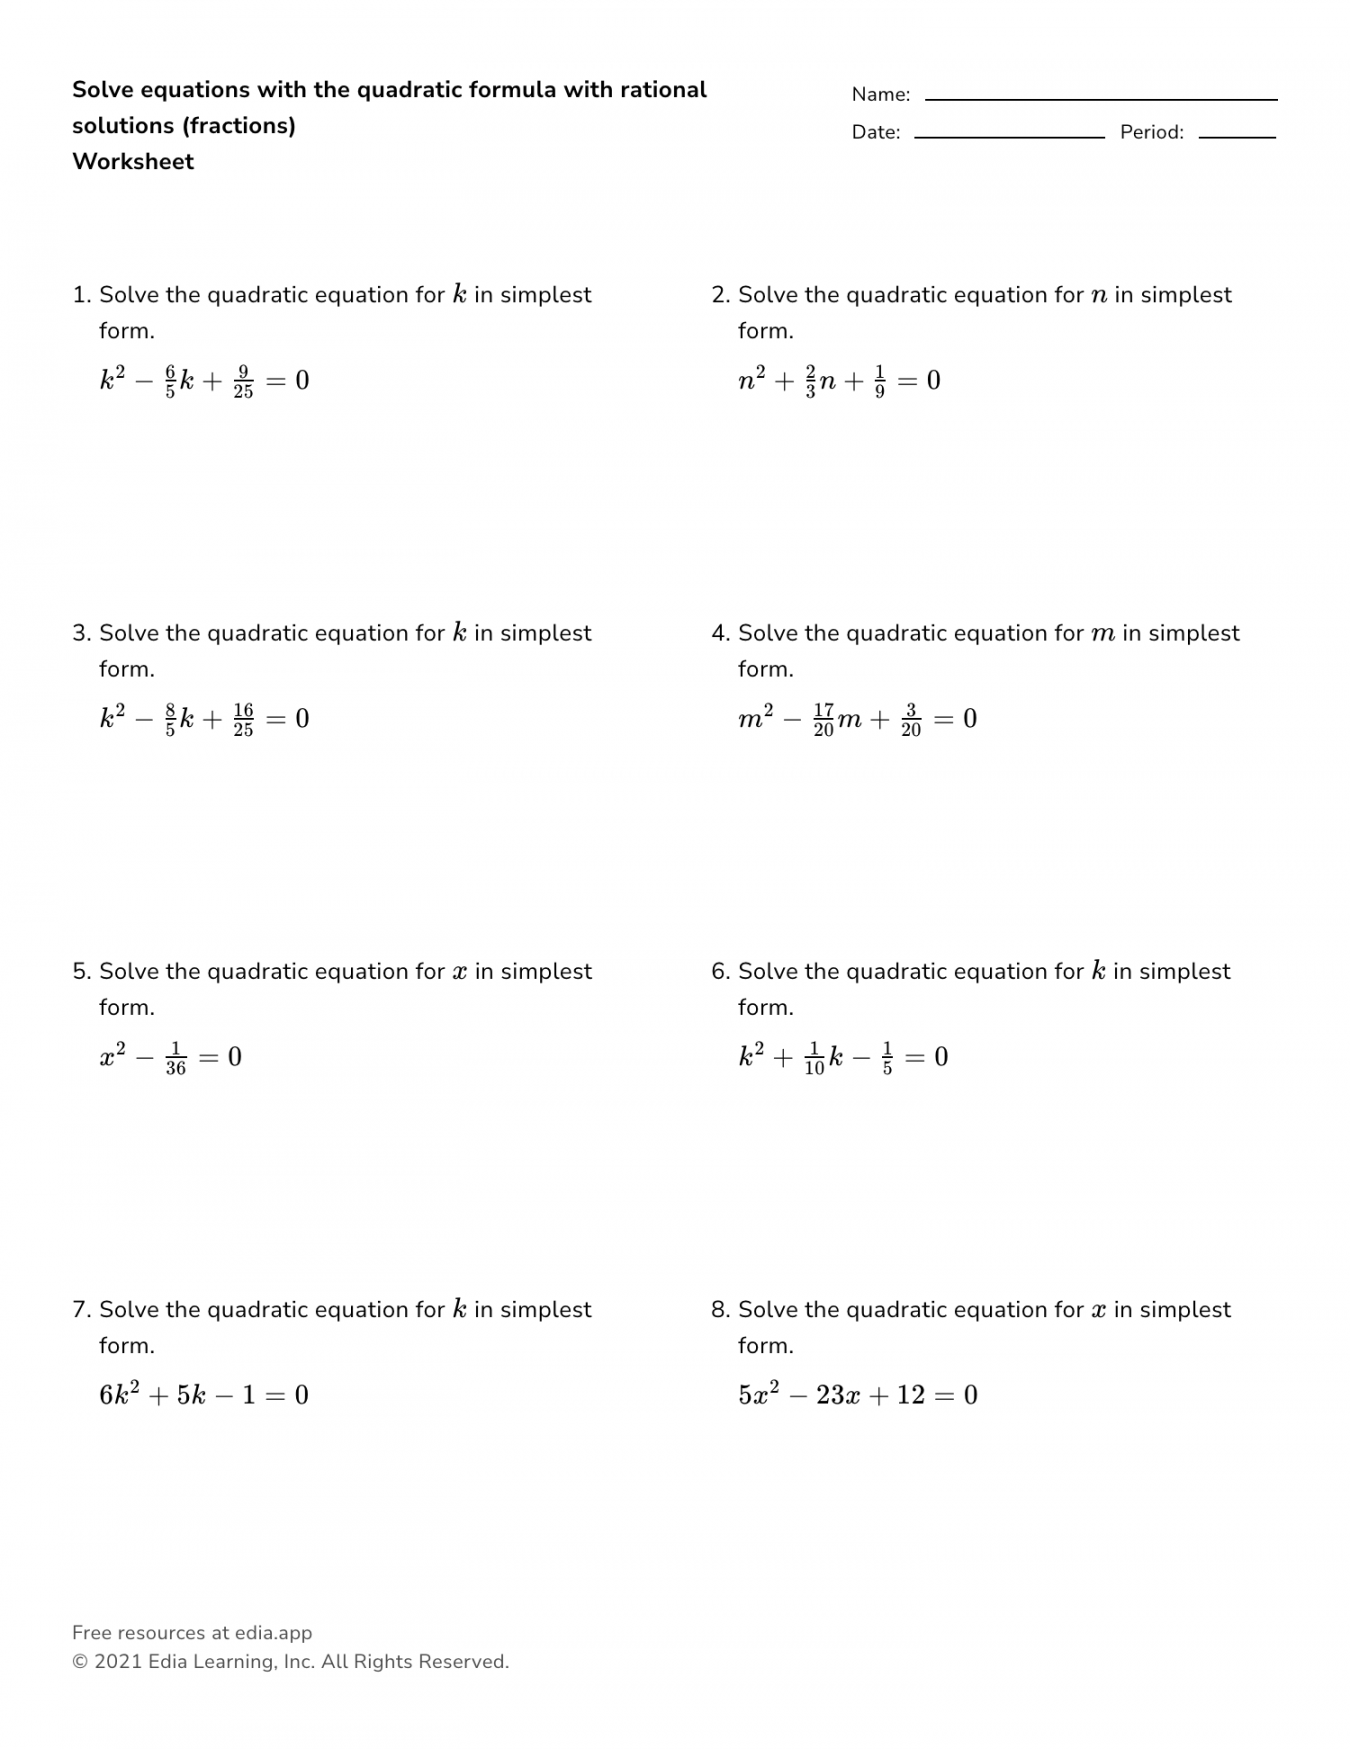 Solve Equations With The Quadratic Formula With Rational Solutions